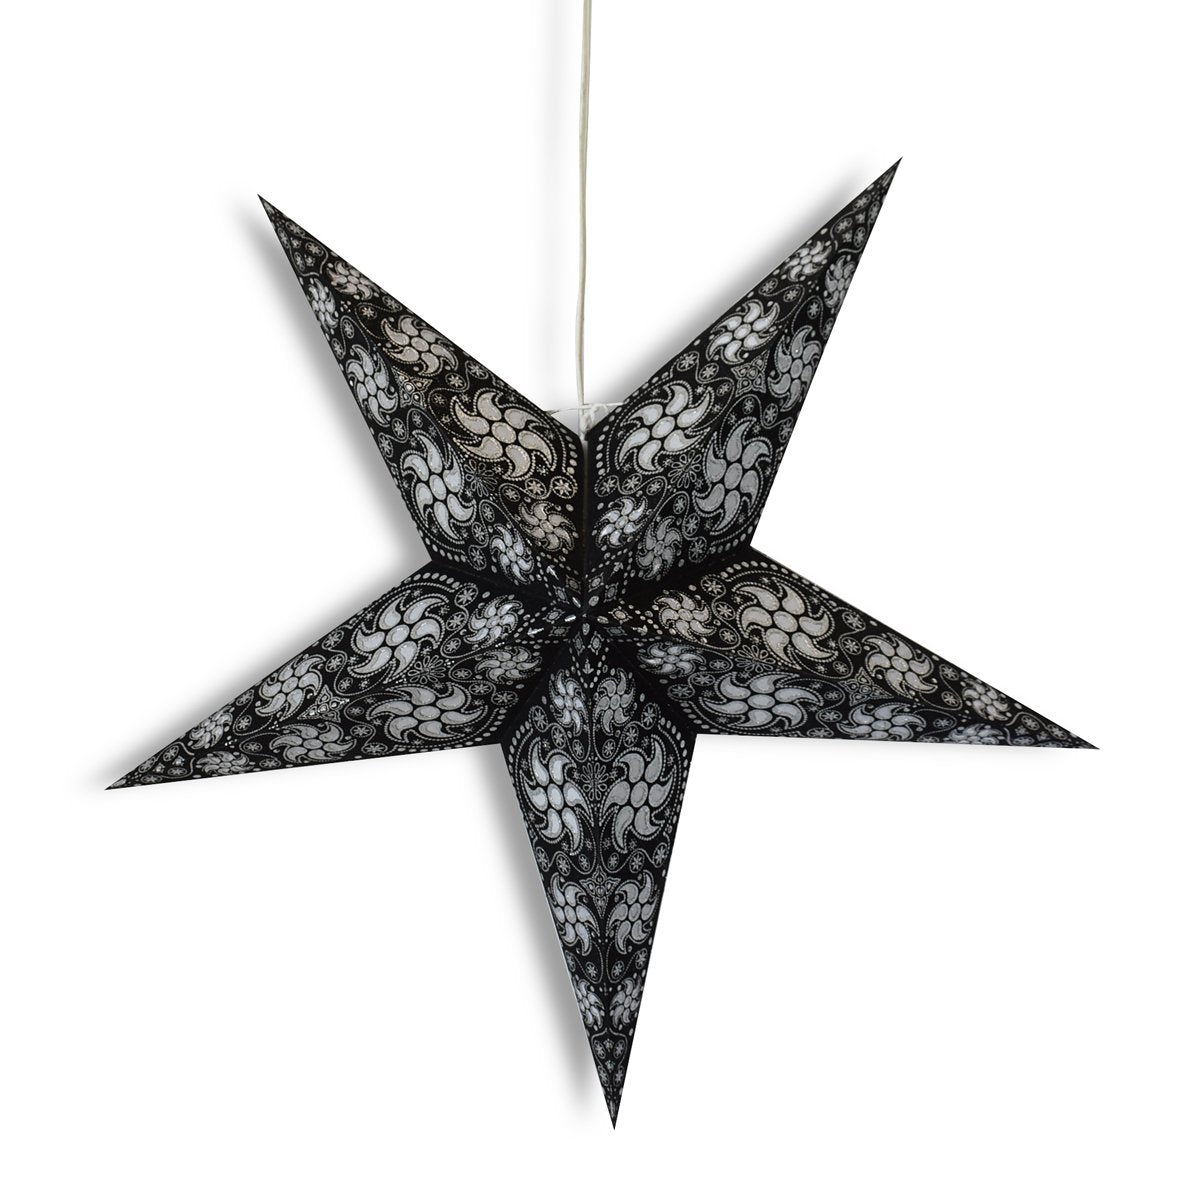 24&quot; Black / Silver Winds Glitter Paper Star Lantern, Hanging Wedding &amp; Party Decoration - PaperLanternStore.com - Paper Lanterns, Decor, Party Lights &amp; More